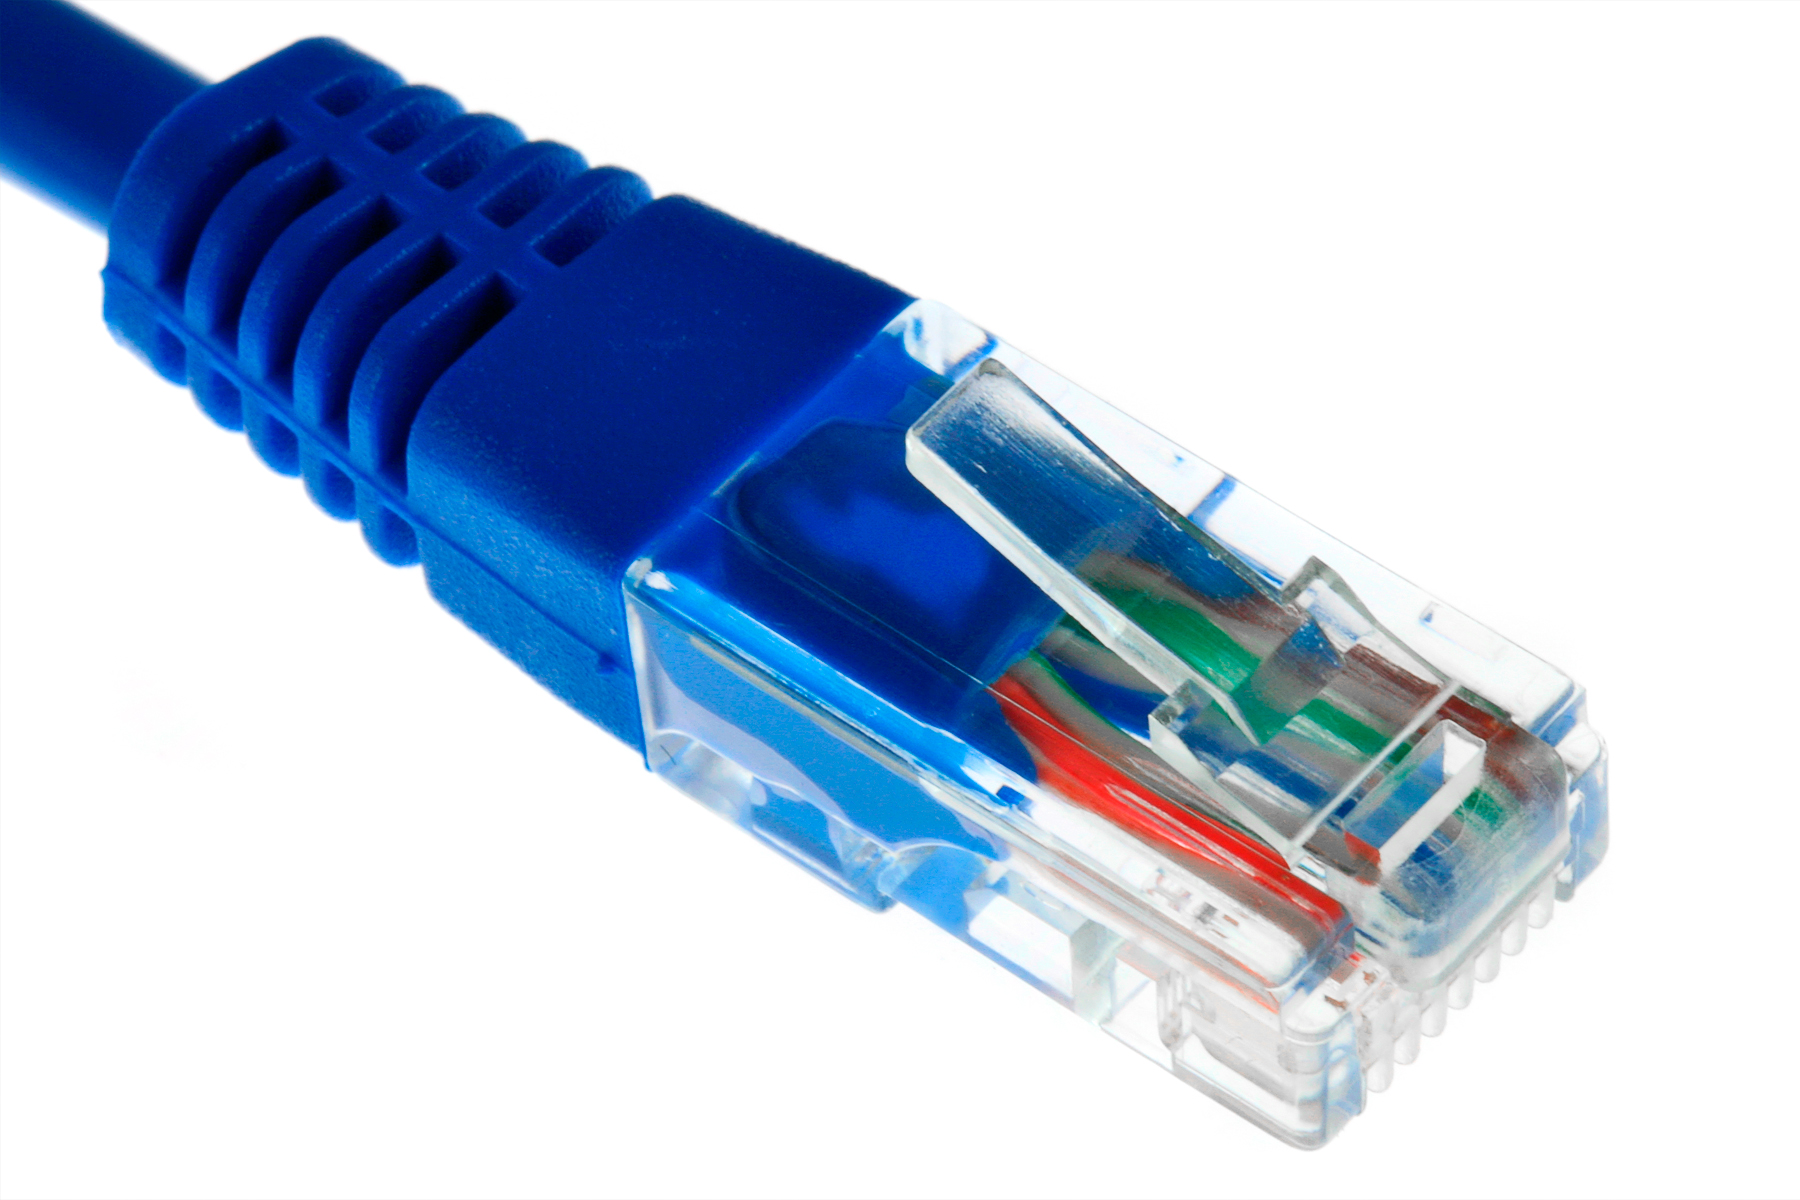 stockvault-ethernet-cable-close-up133452